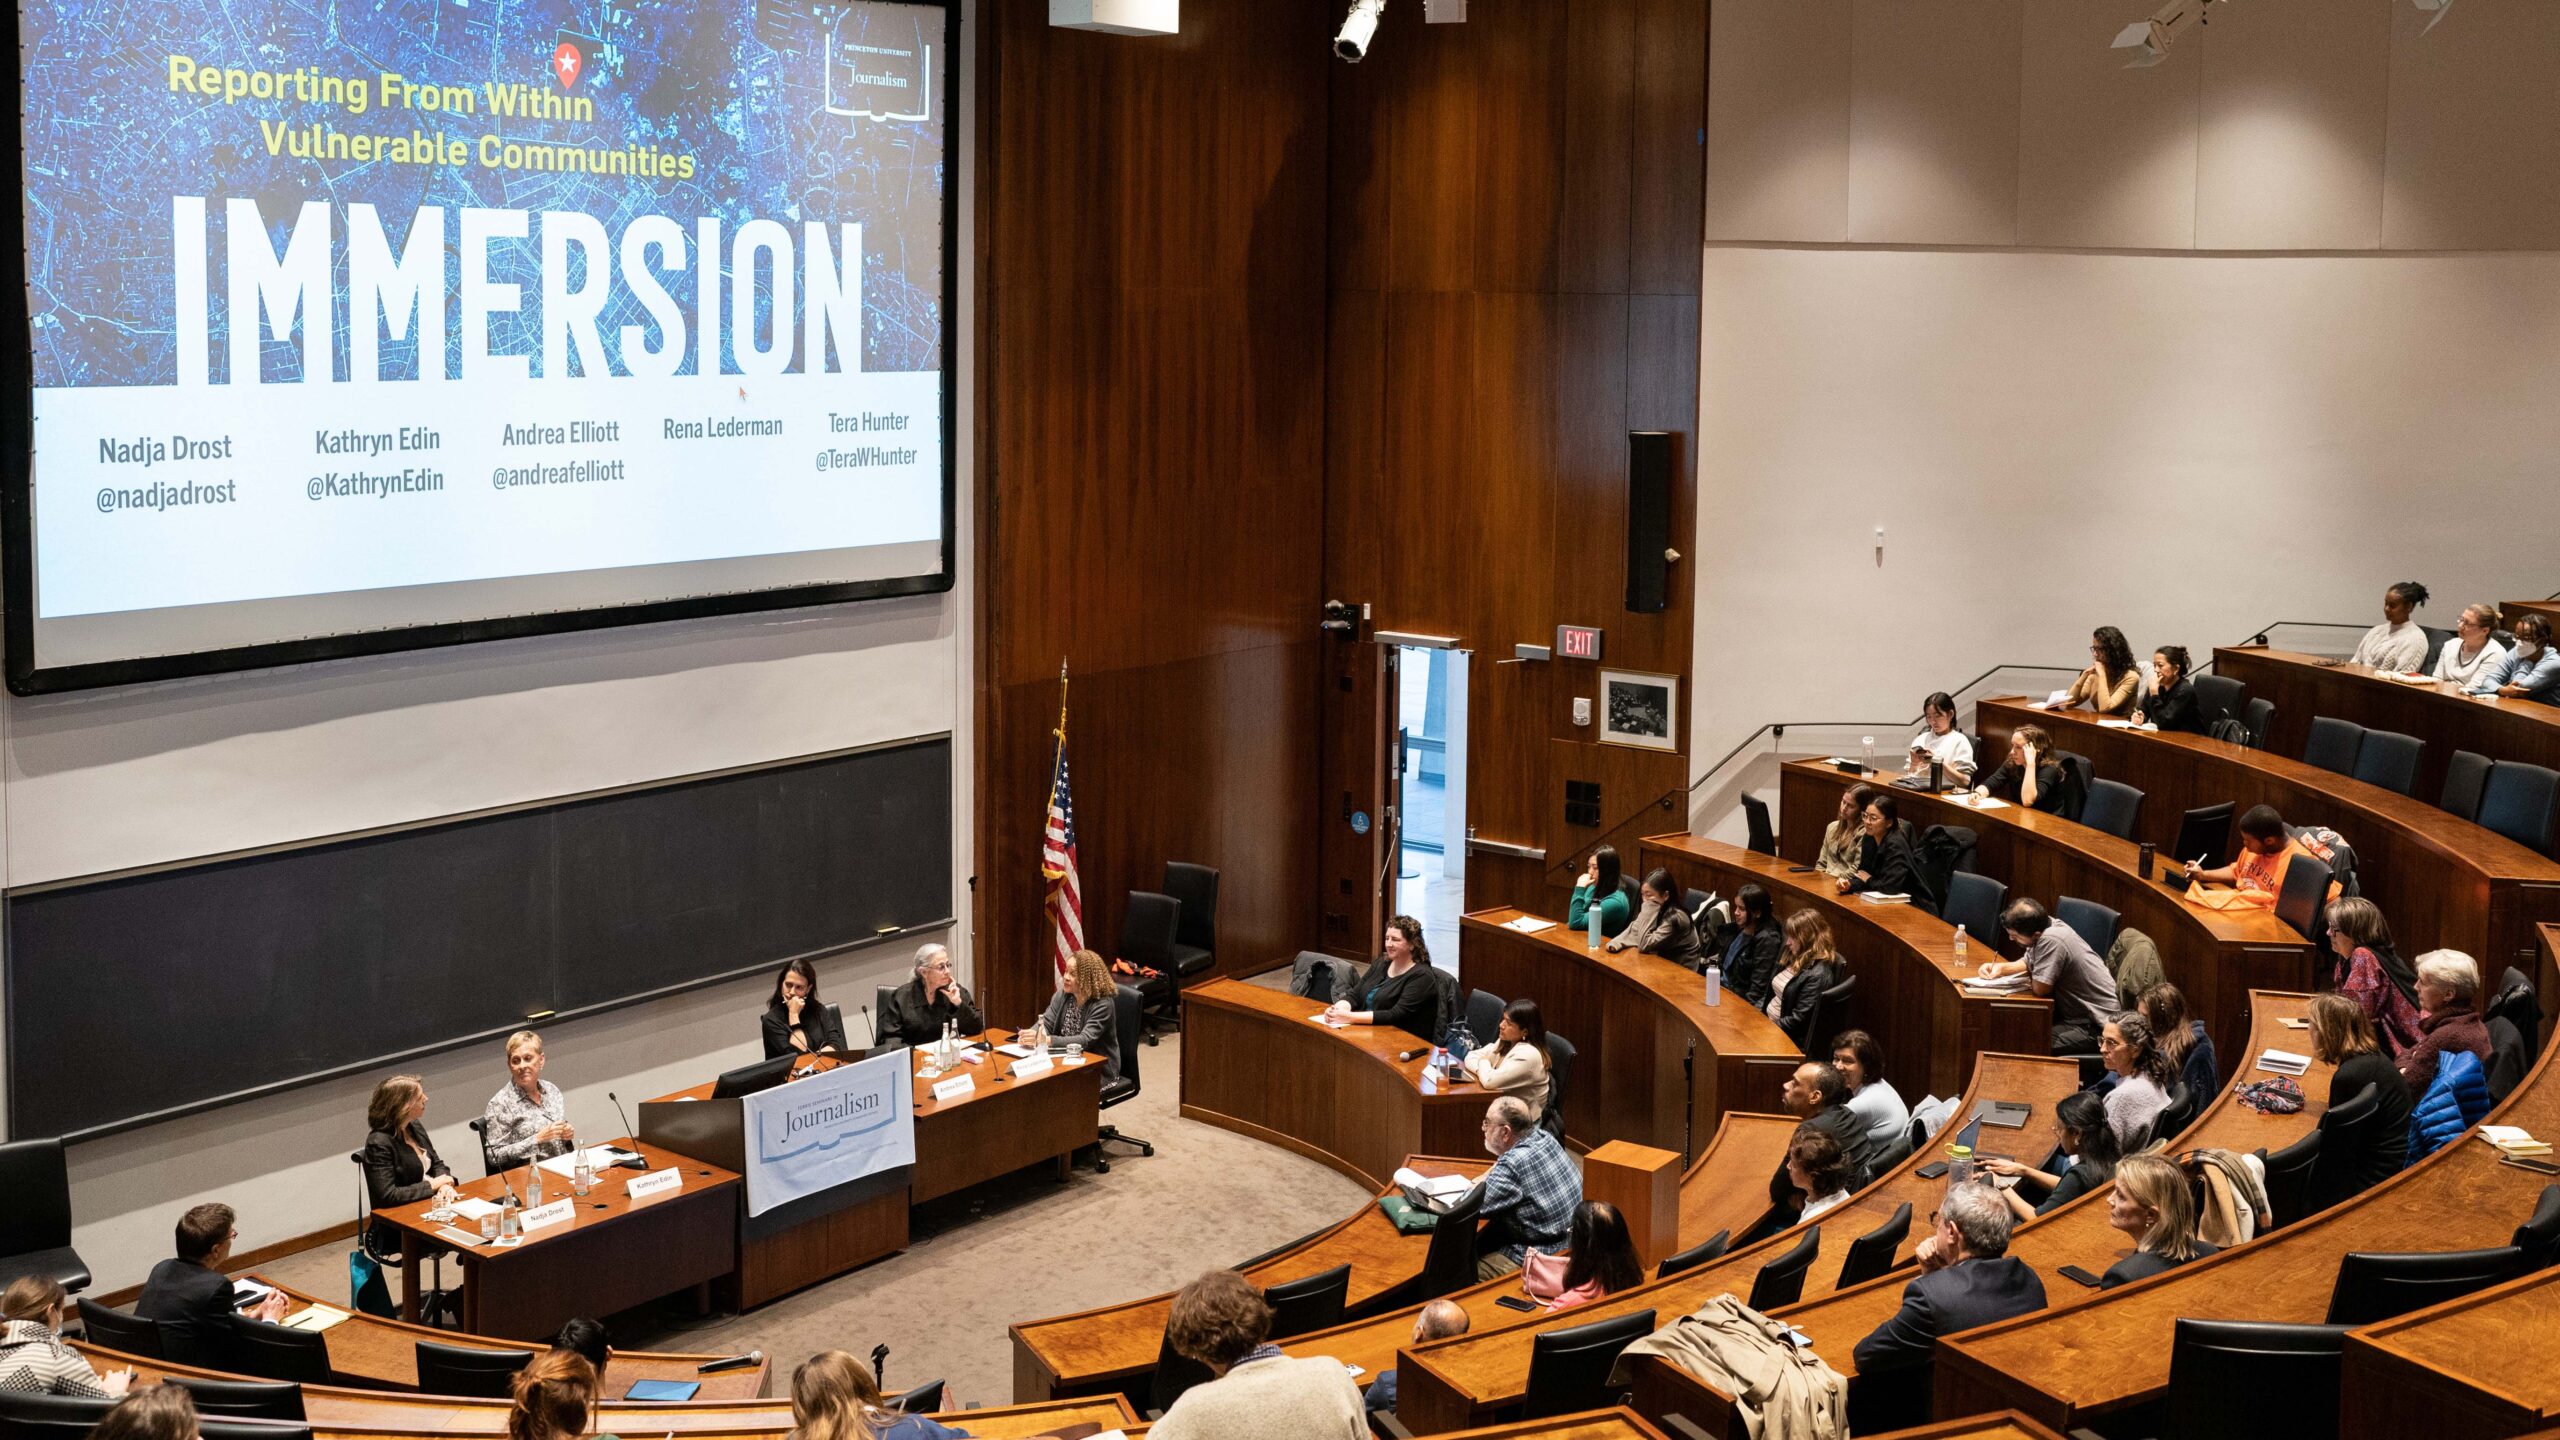 VIDEO: Journalism Panel Explores the Complexities of Immersion Reporting